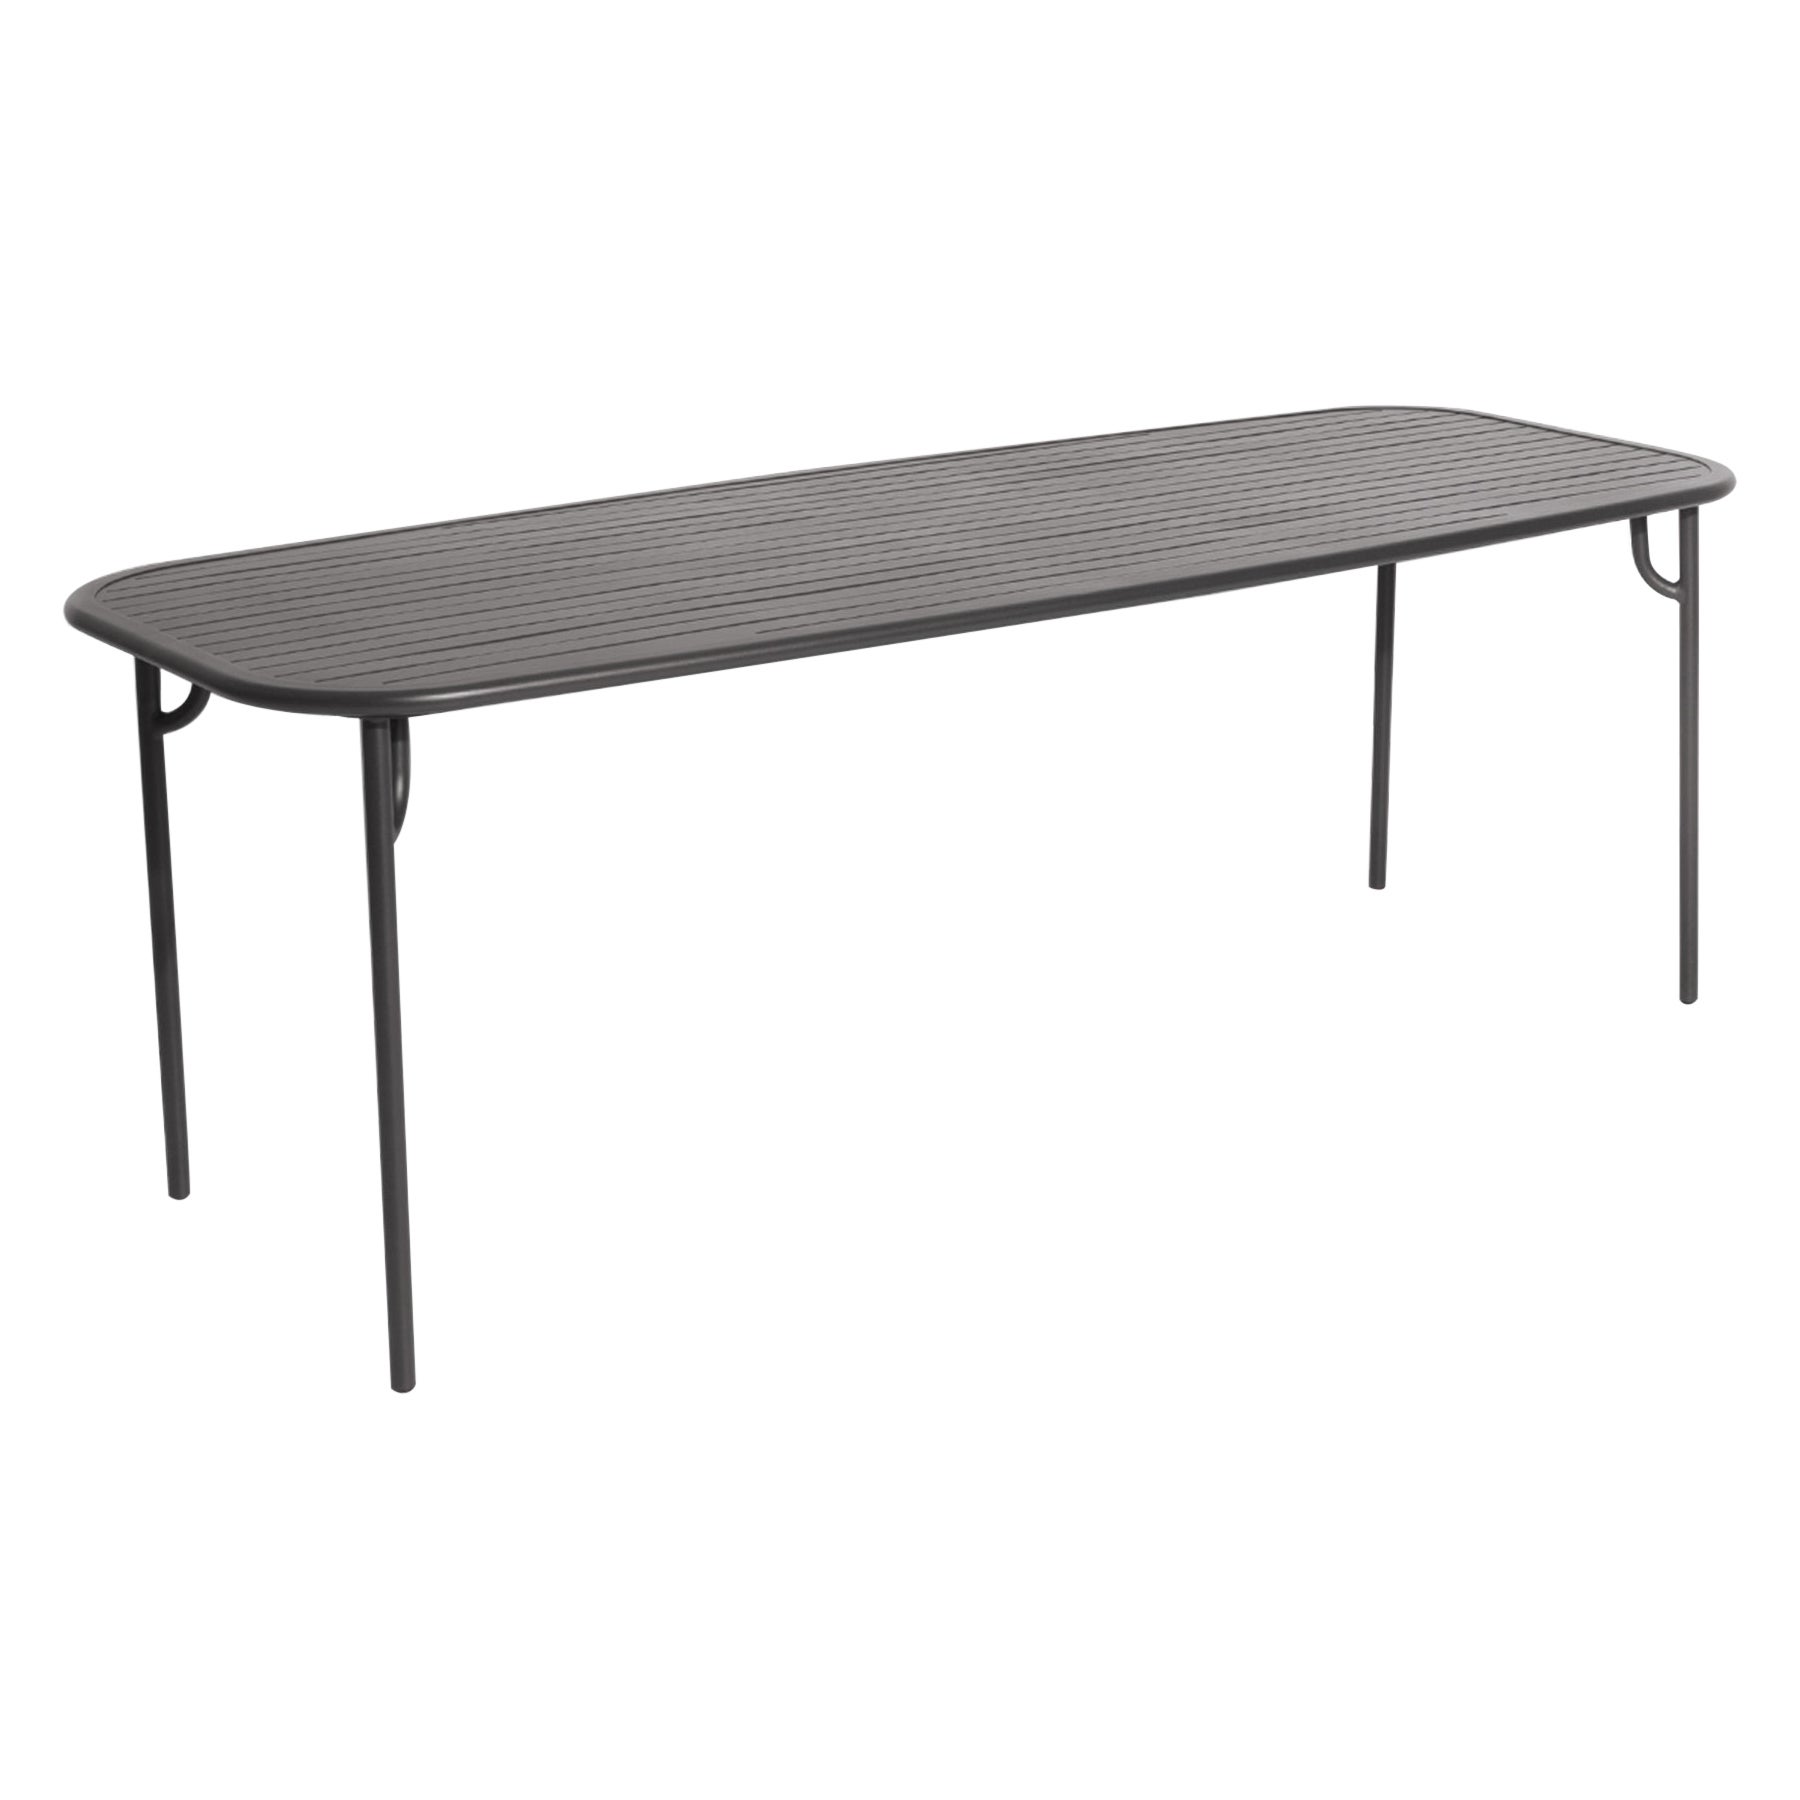 Petite Friture Week-End Large Rectangular Dining Table in Anthracite with Slats For Sale